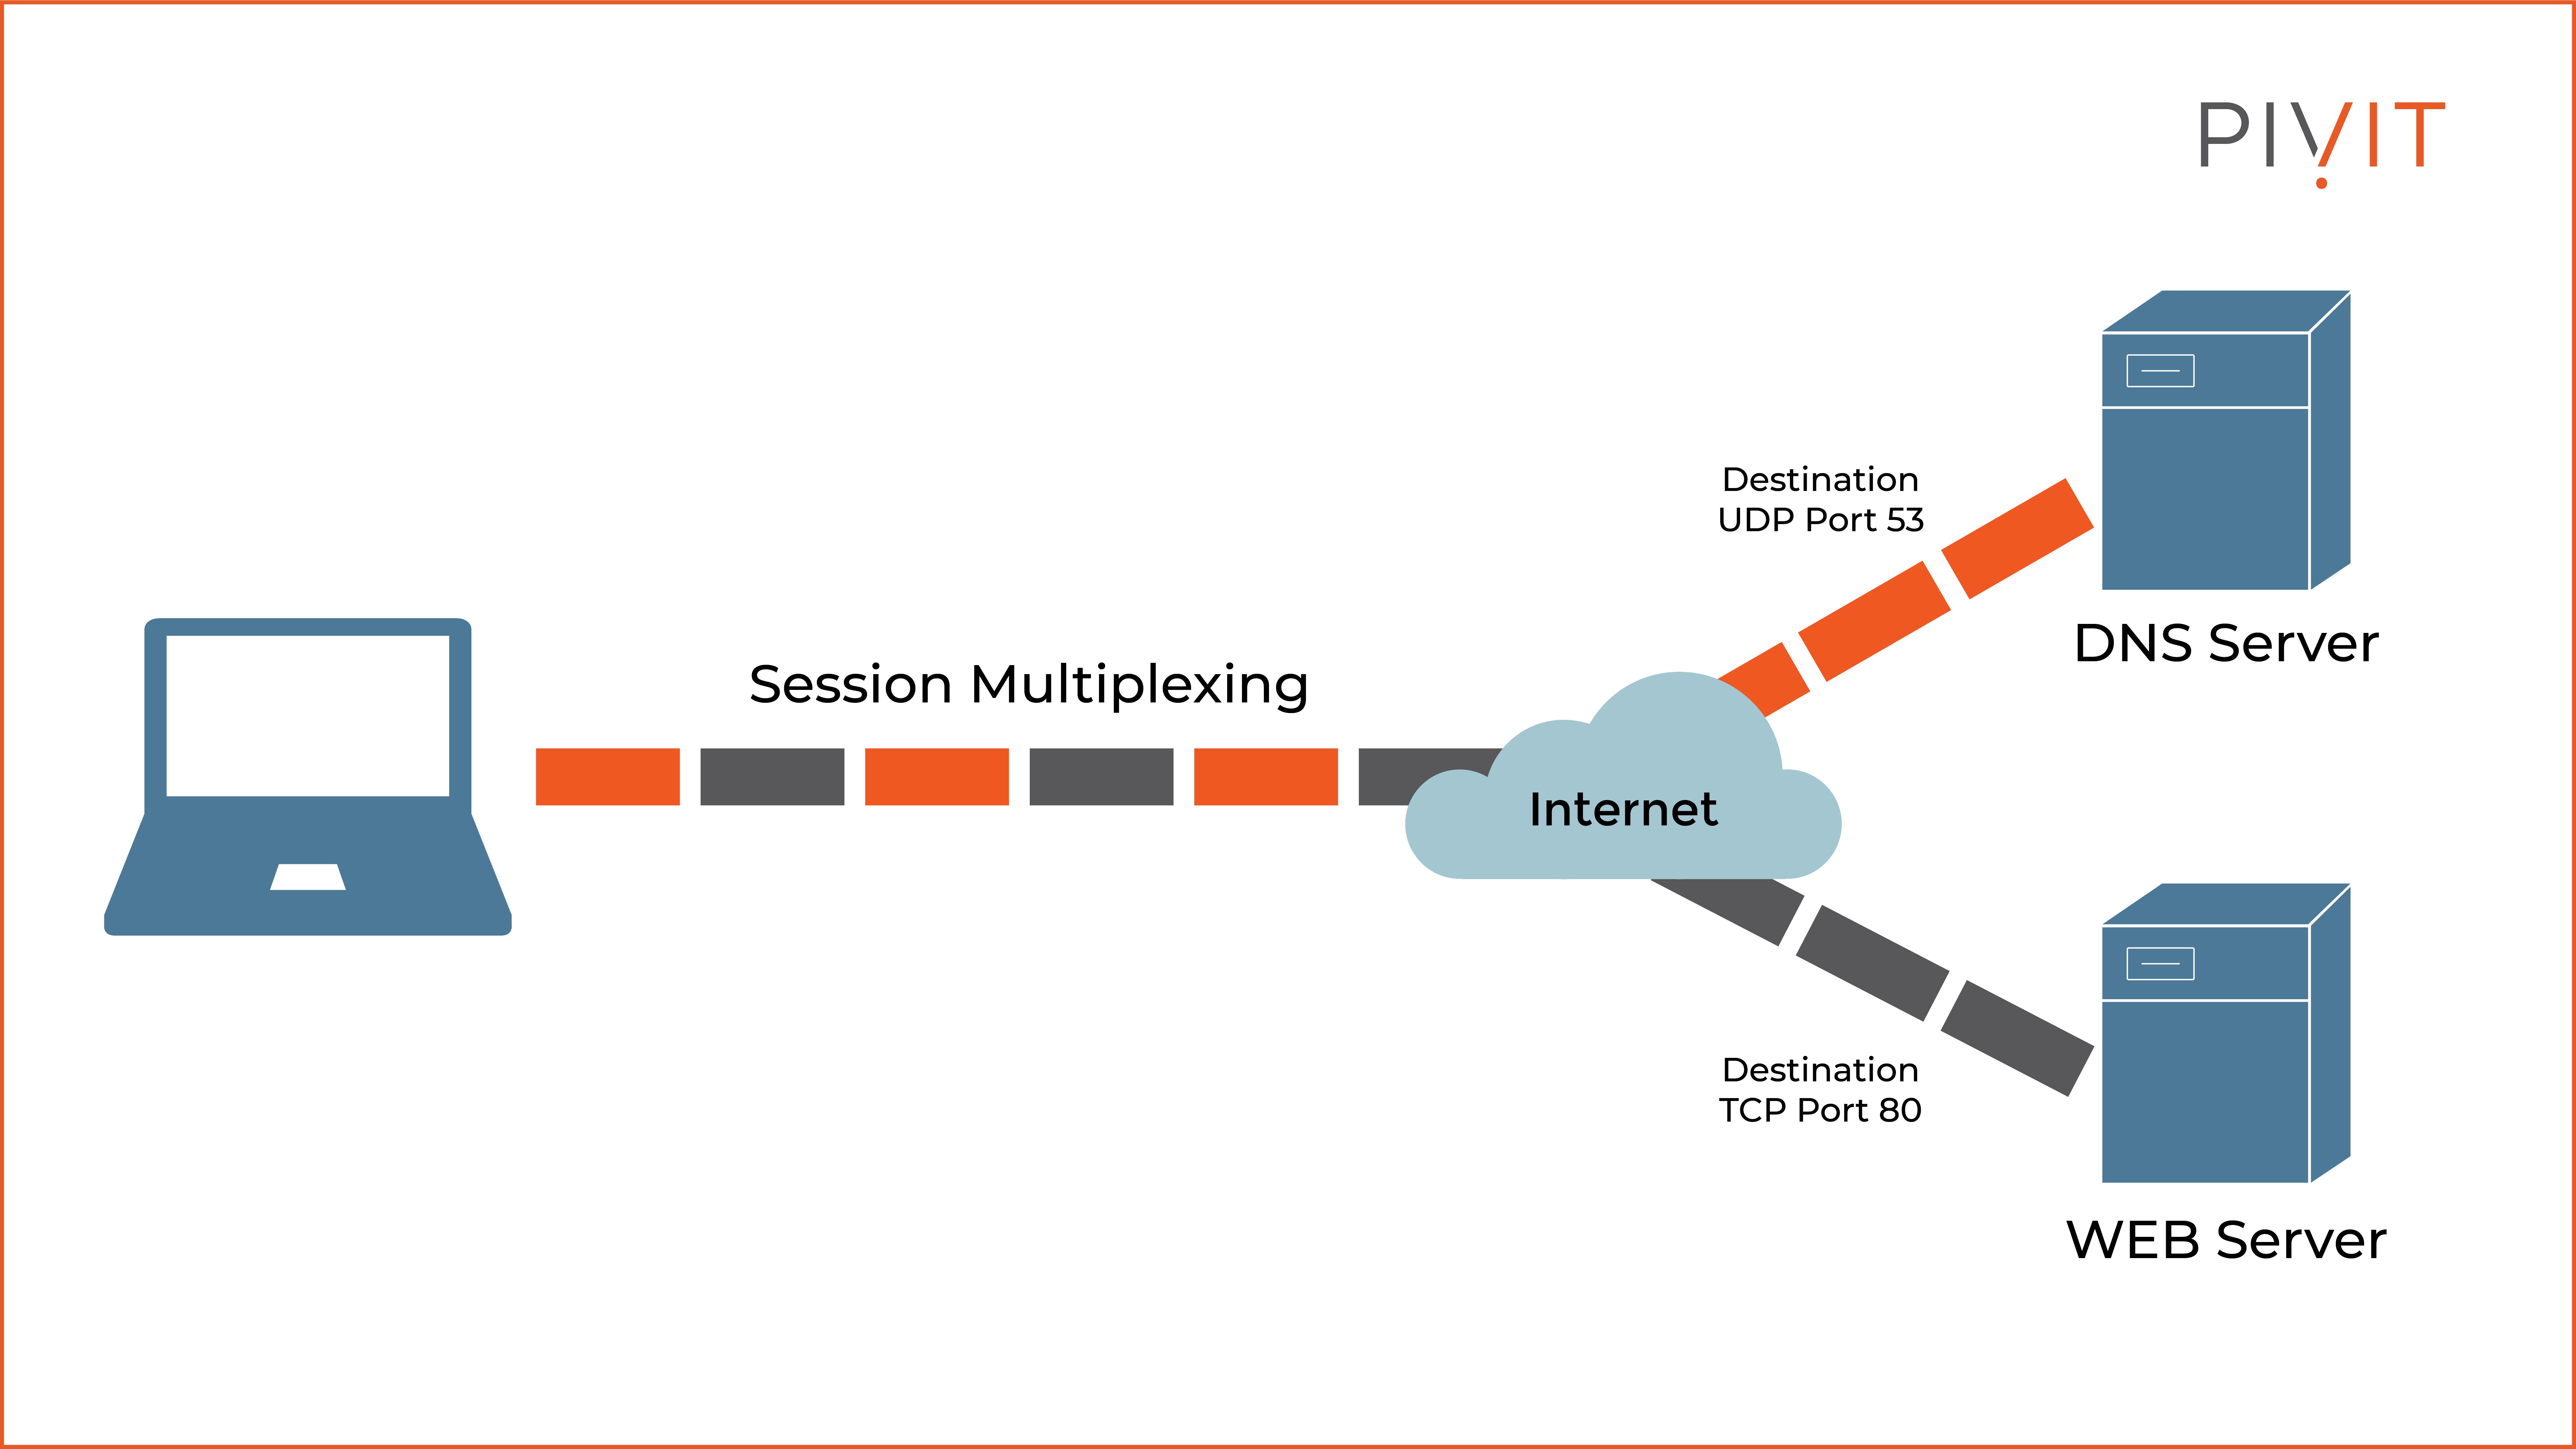 Session multiplexing service provided by the transport layer for HTTP and DNS traffic